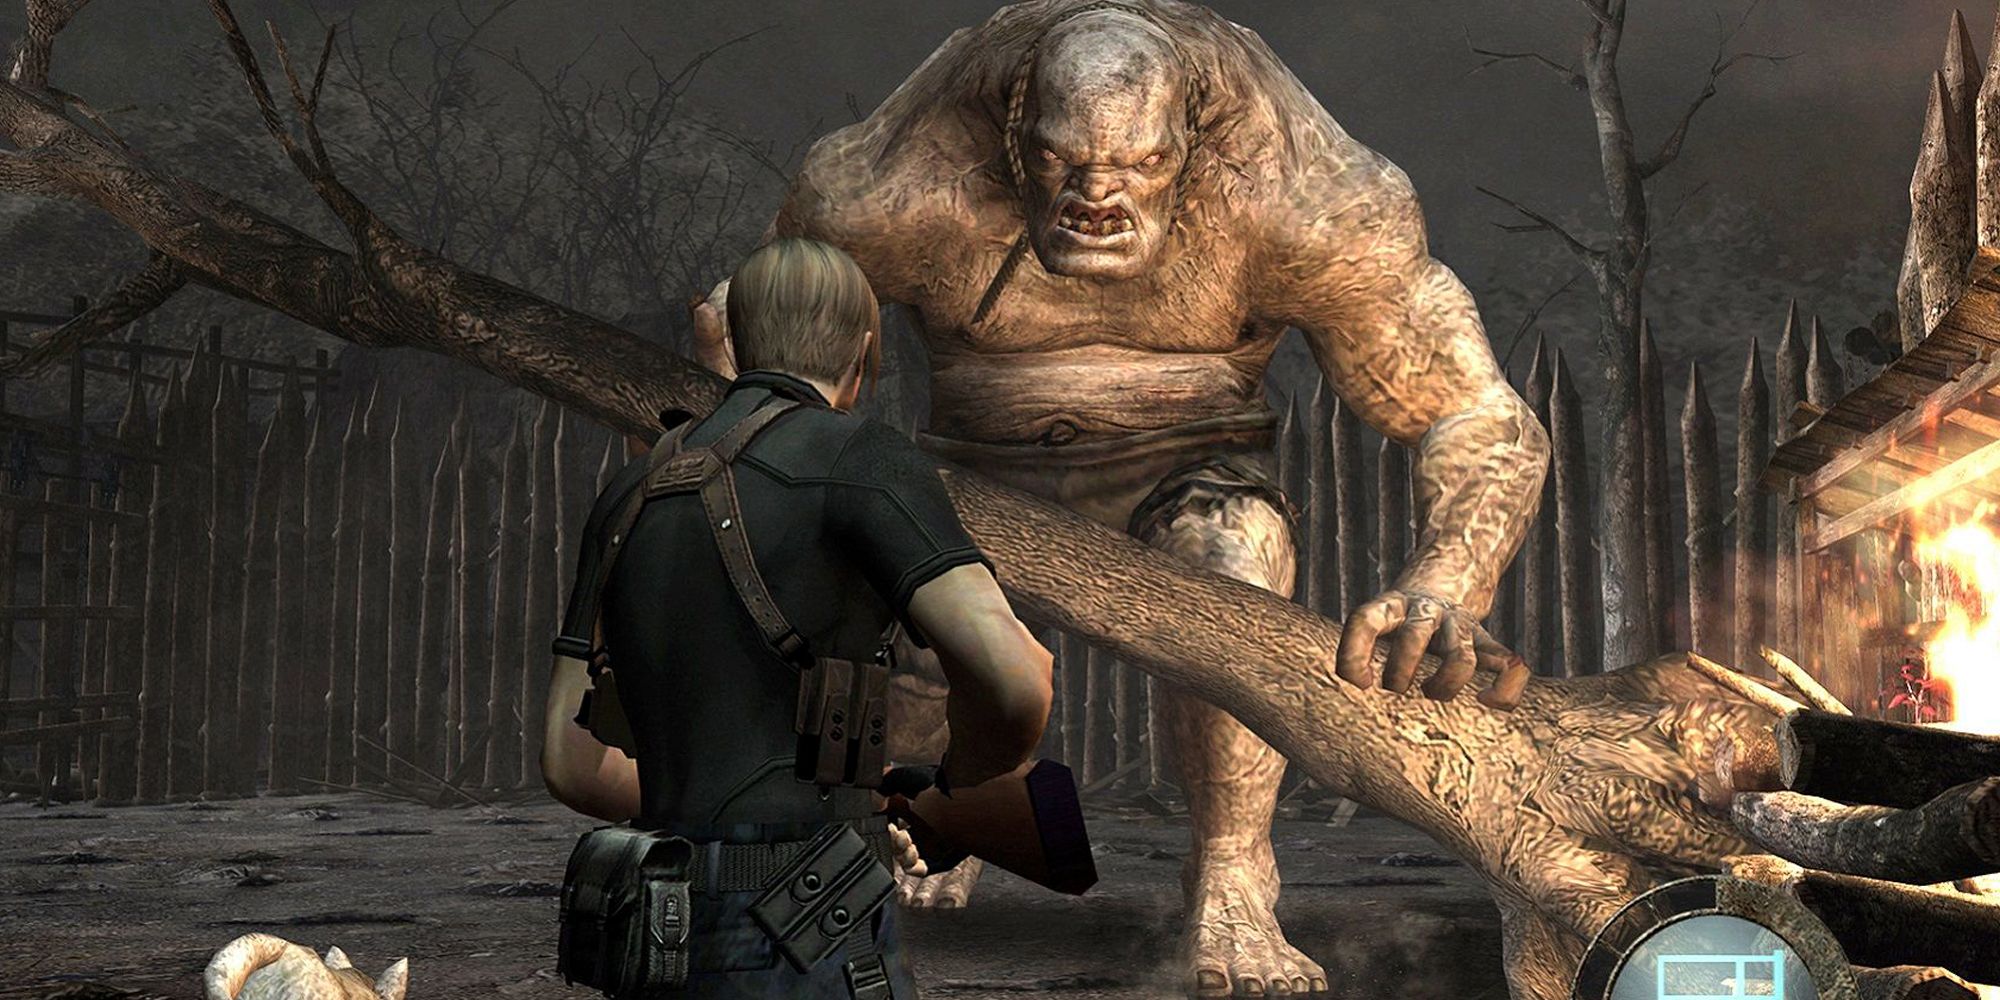 Resident Evil 4 El Gigante. Leon Kennedy fighting a huge enemy who is wielding a tree, ready to attack.